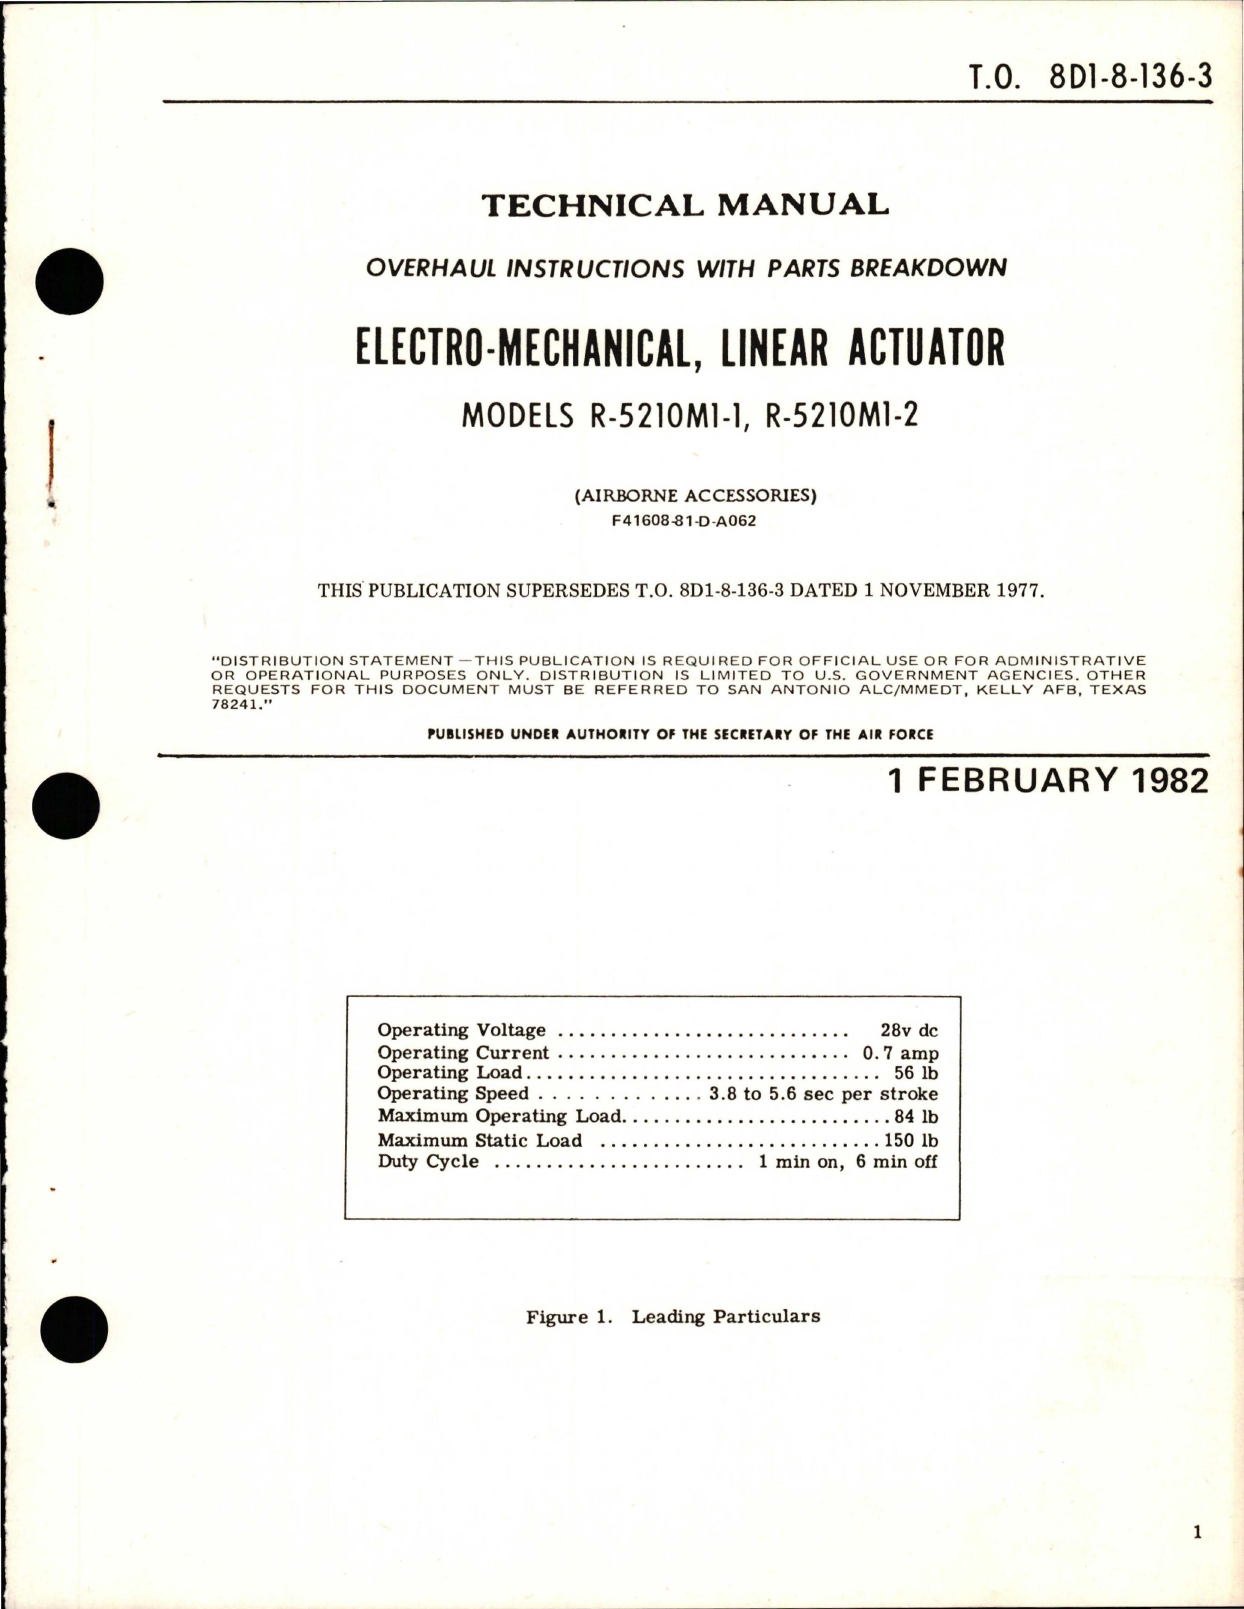 Sample page 1 from AirCorps Library document: Overhaul Instructions with Parts for Electro Mechanical Linear Actuator - Models R-5210M1-1 and R-5210M1-2